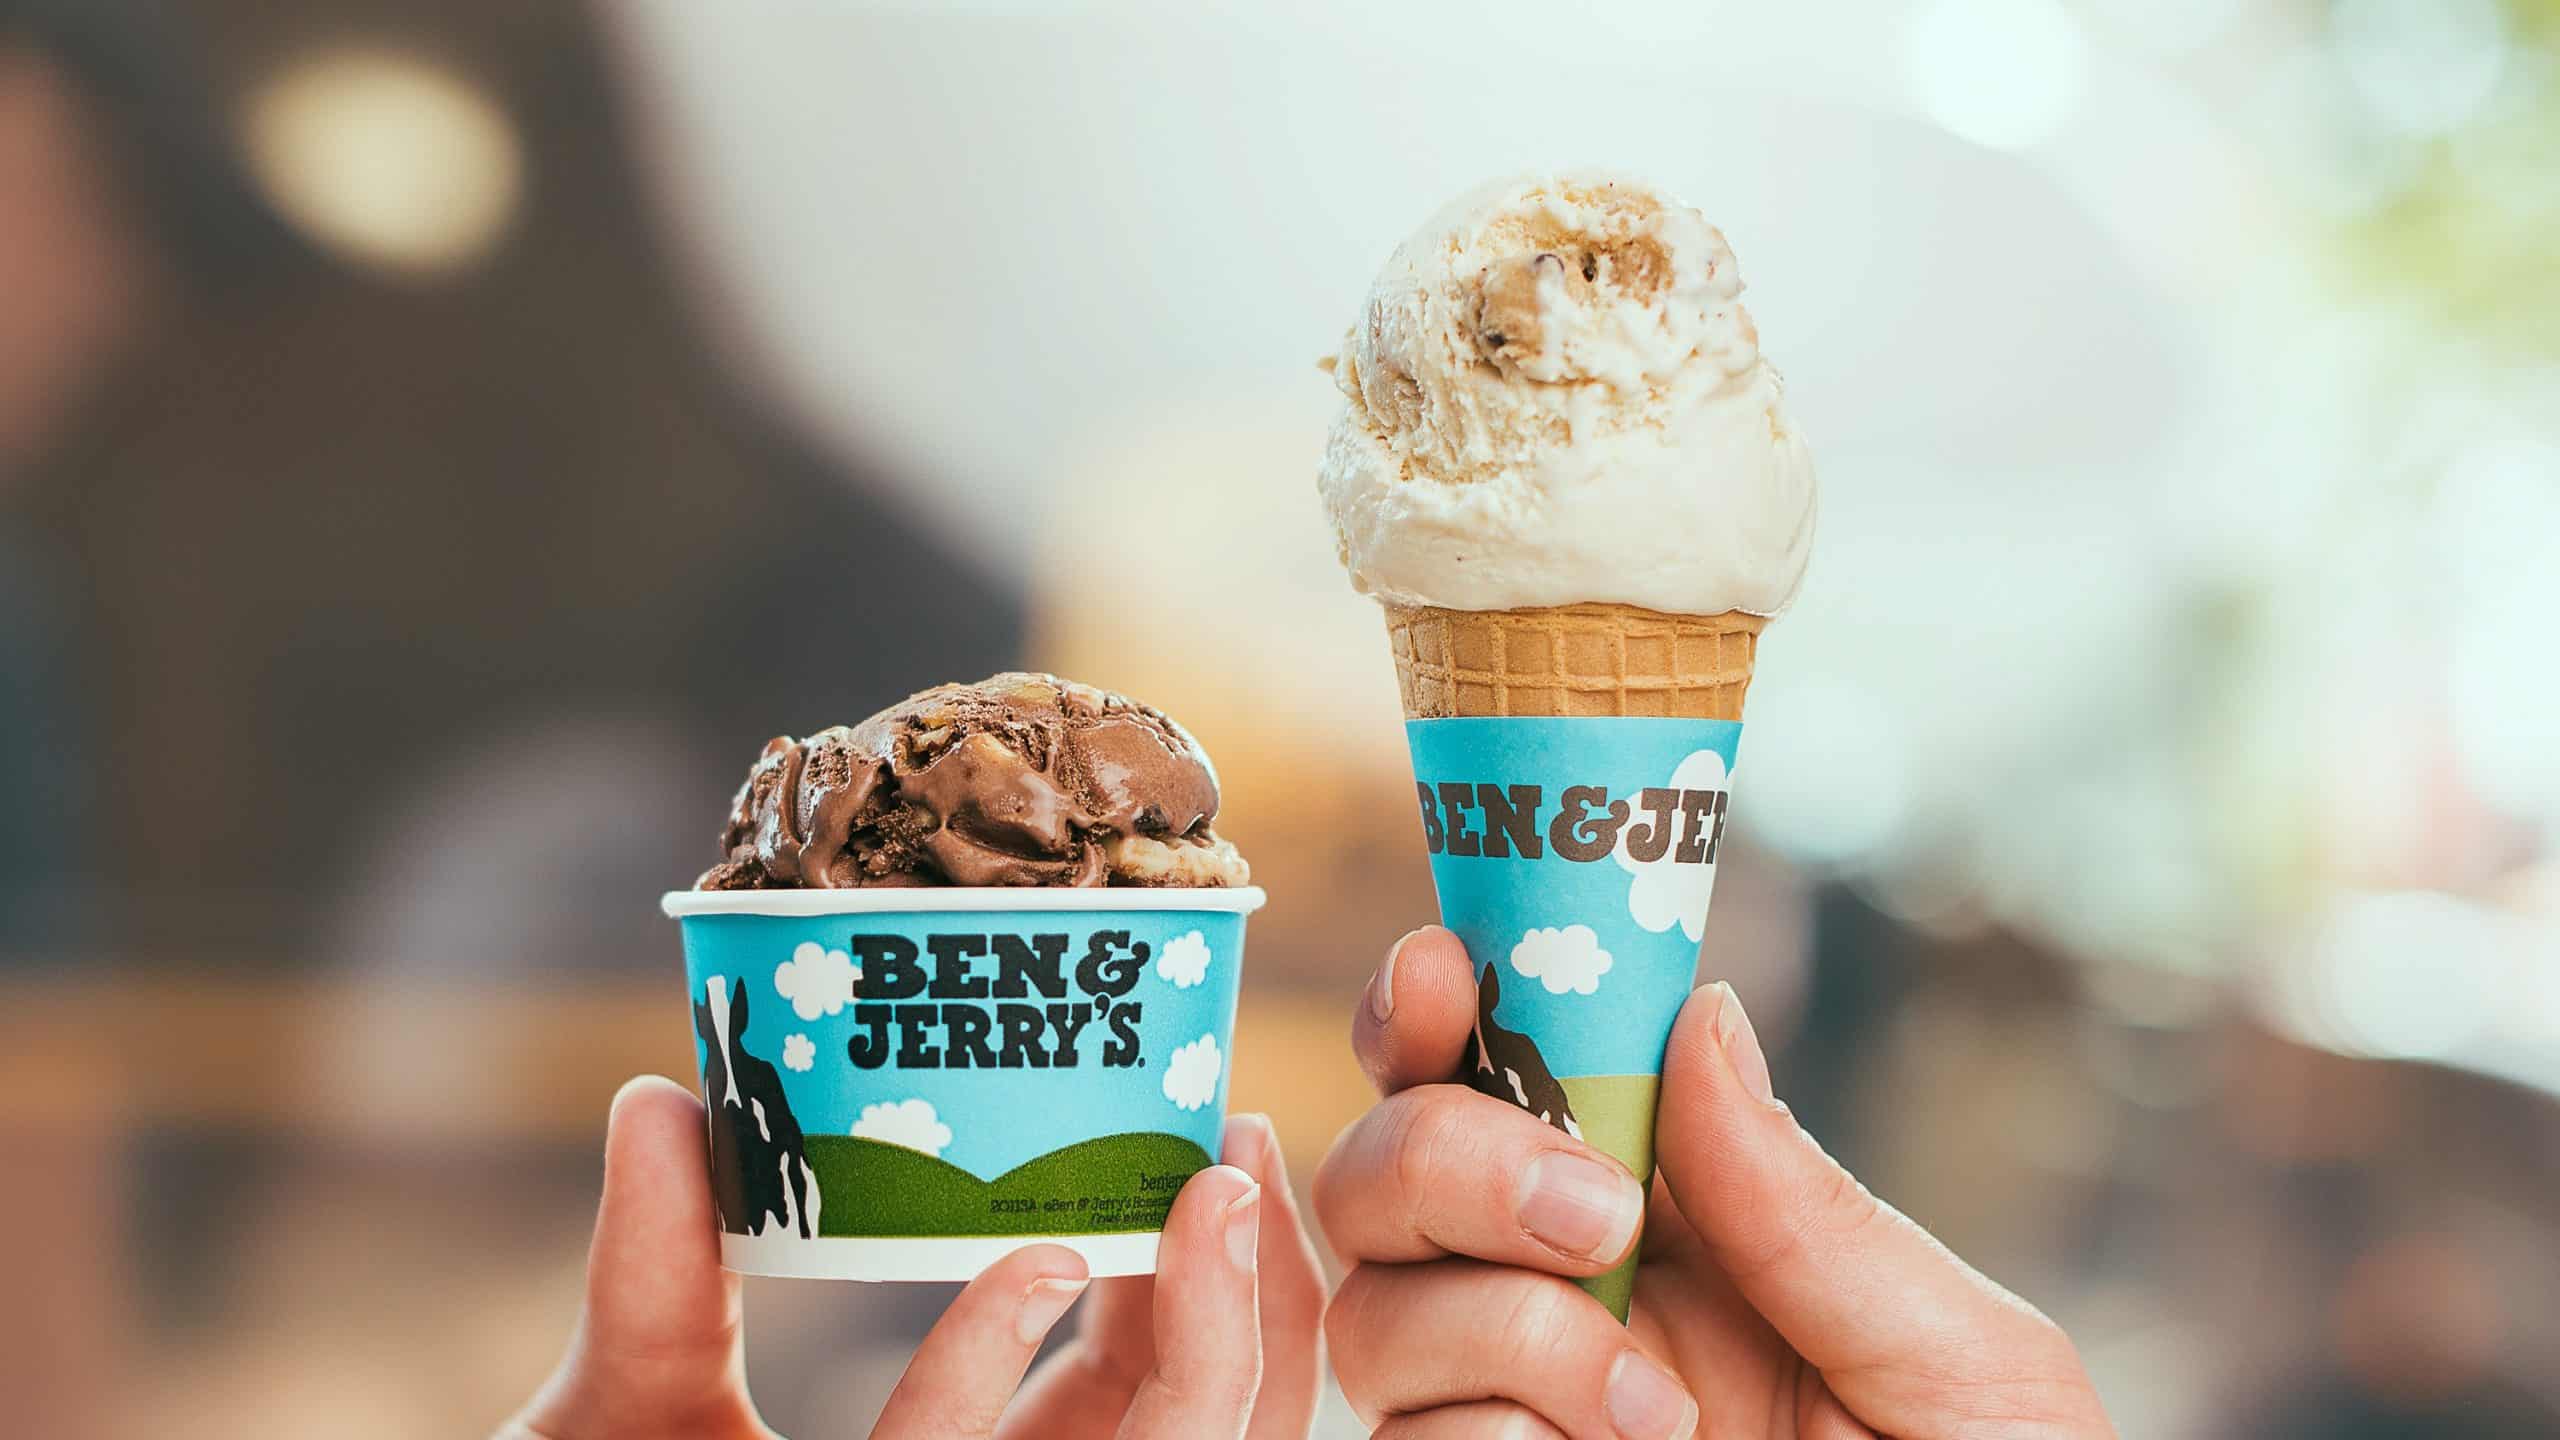 Ben & Jerry’s latest company to pull advertising from Facebook over racism